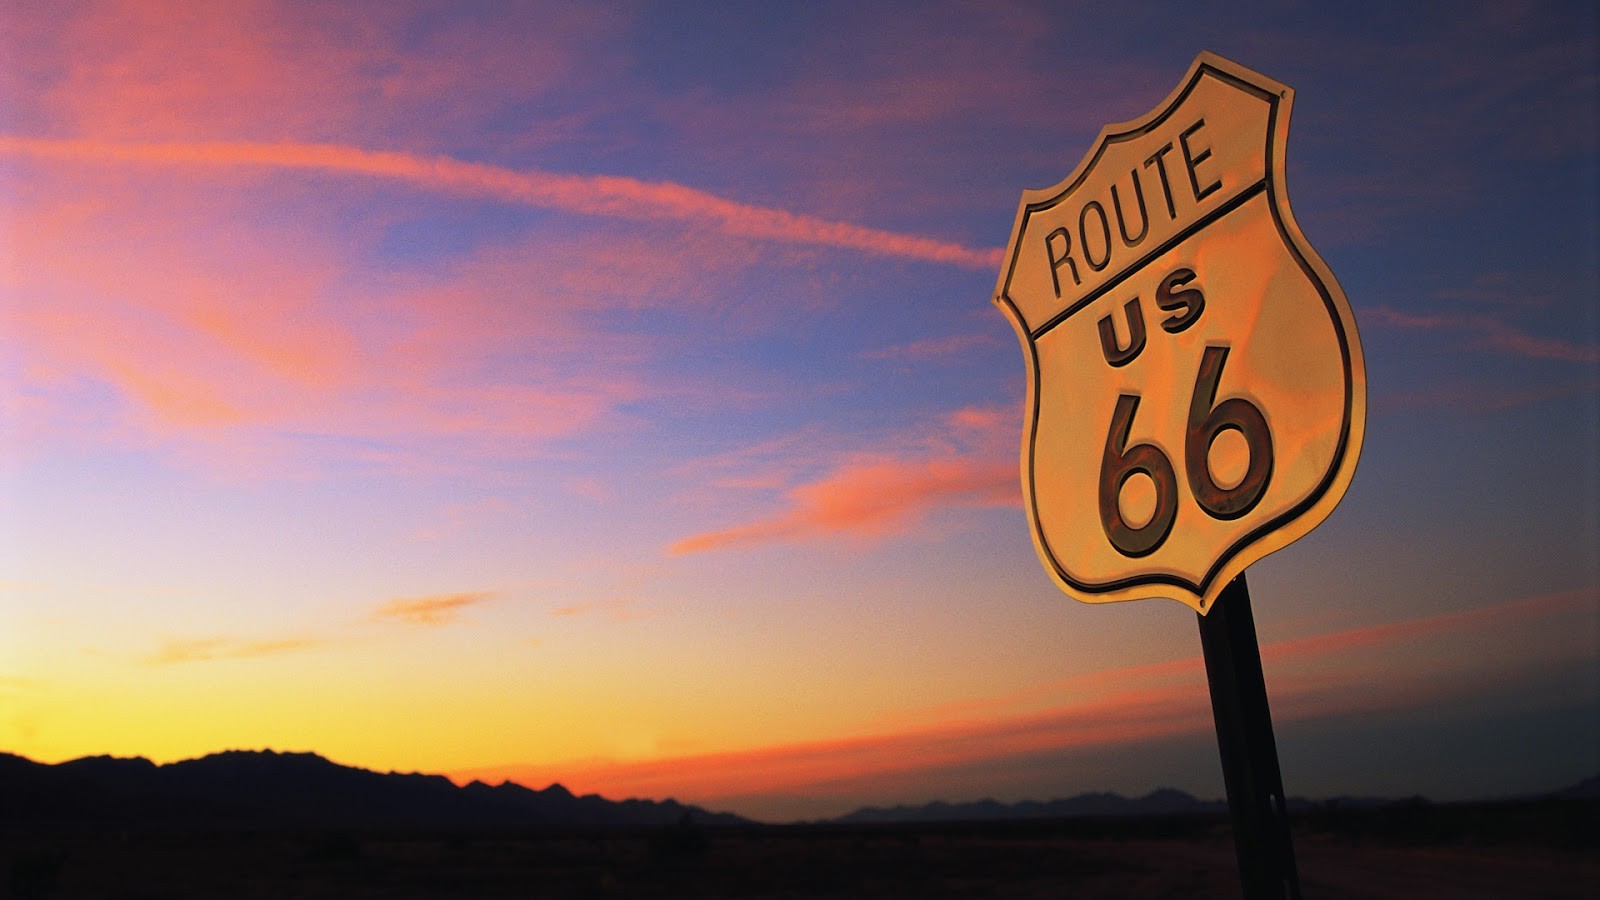 Road Route 66 USA Highway Road Sign Nature Landscape Sunset Clouds Contrails Mountains Low Angle 1600x900